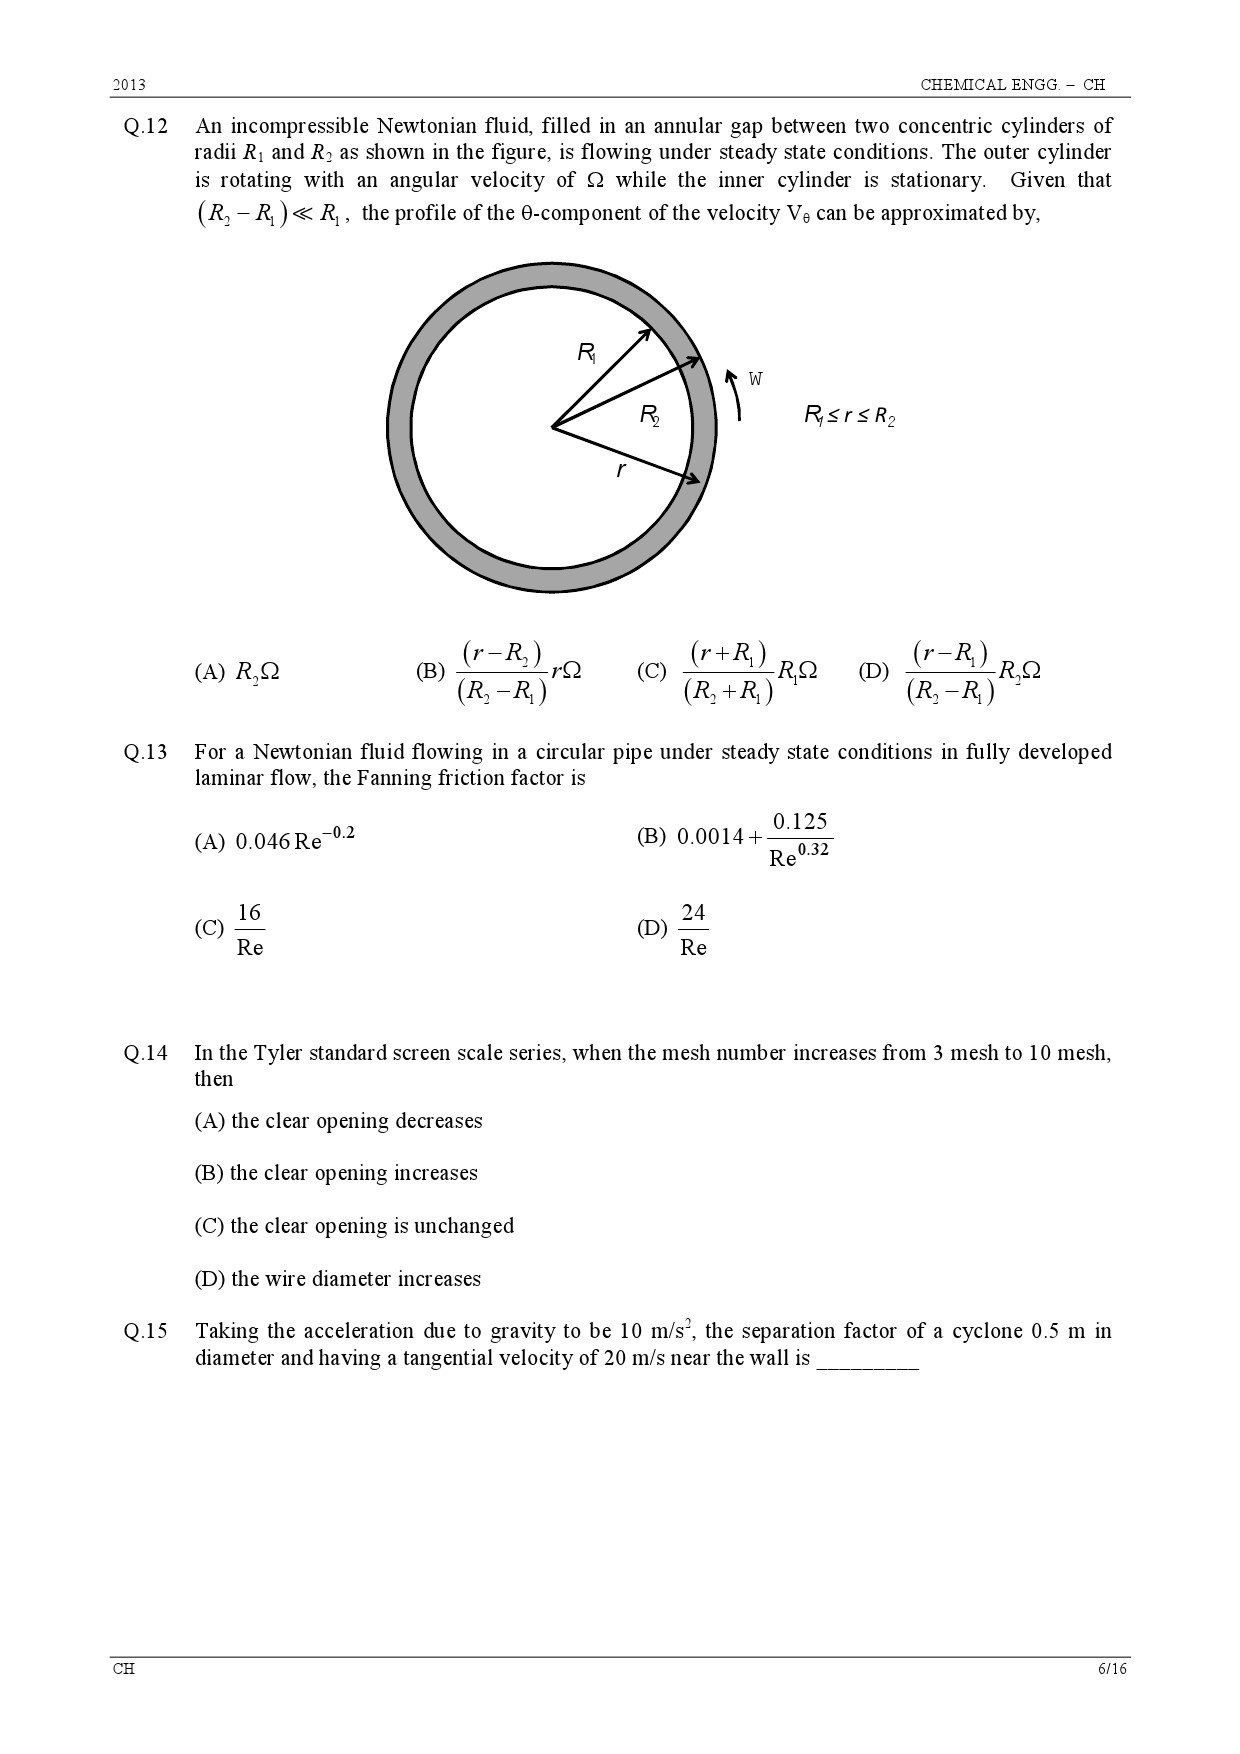 GATE Exam Question Paper 2013 Chemical Engineering 6